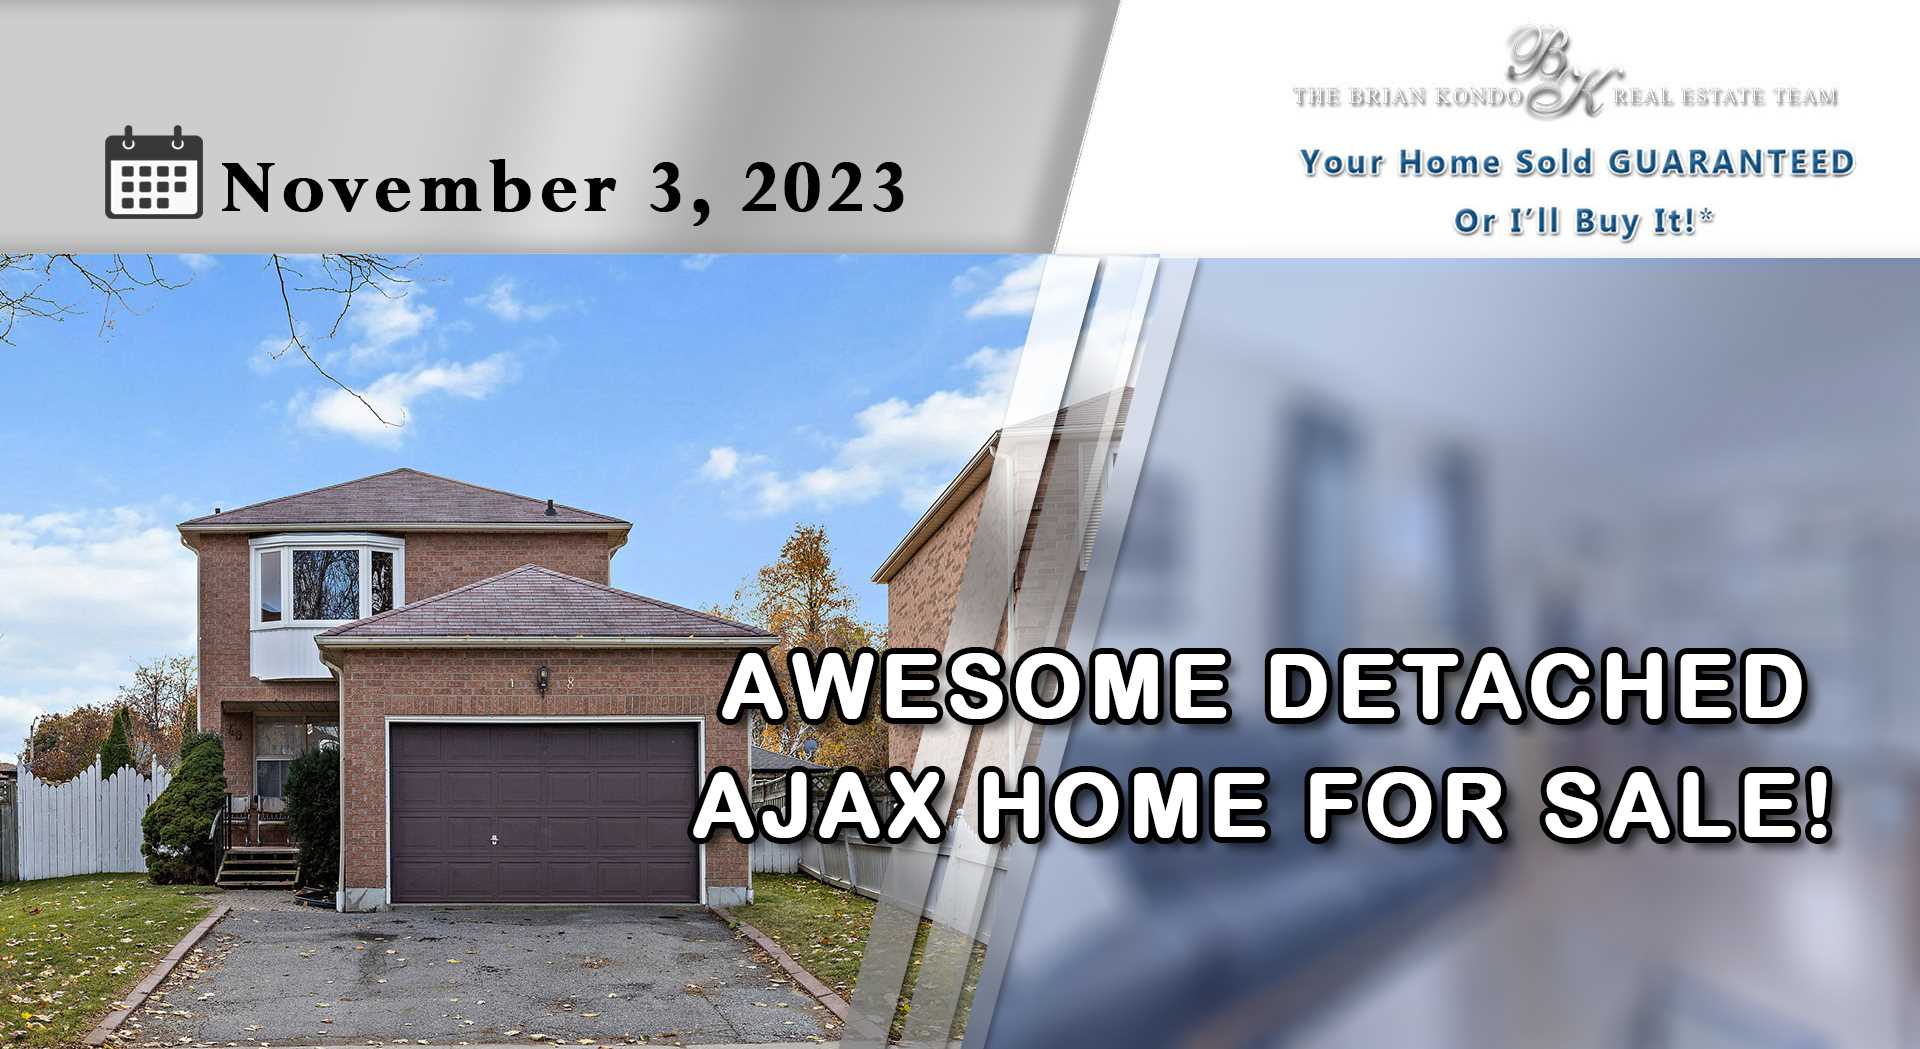 AWESOME DETACHED AJAX HOME FOR SALE!